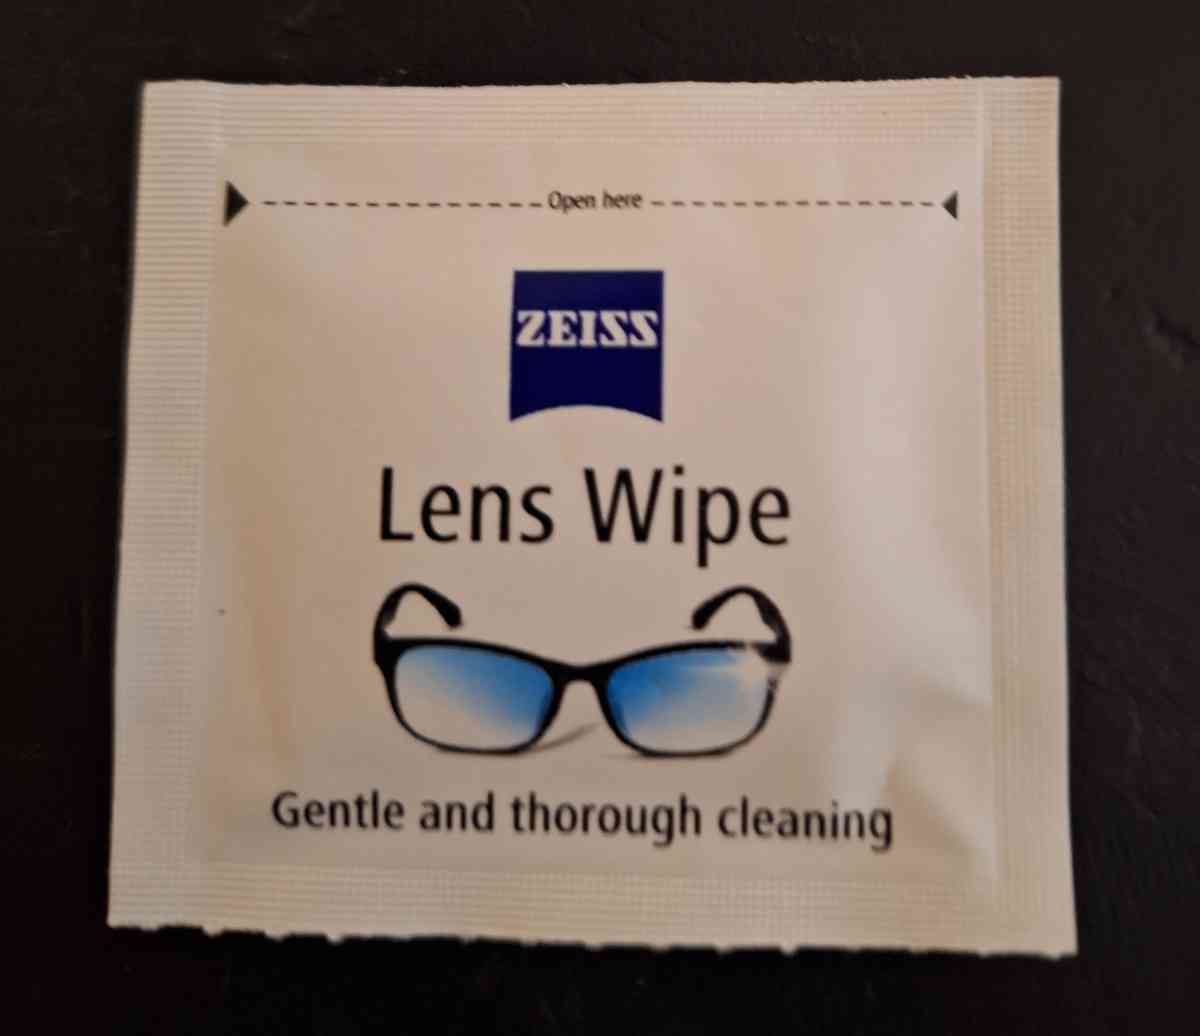 60 to 70 Zeiss Lens wipes